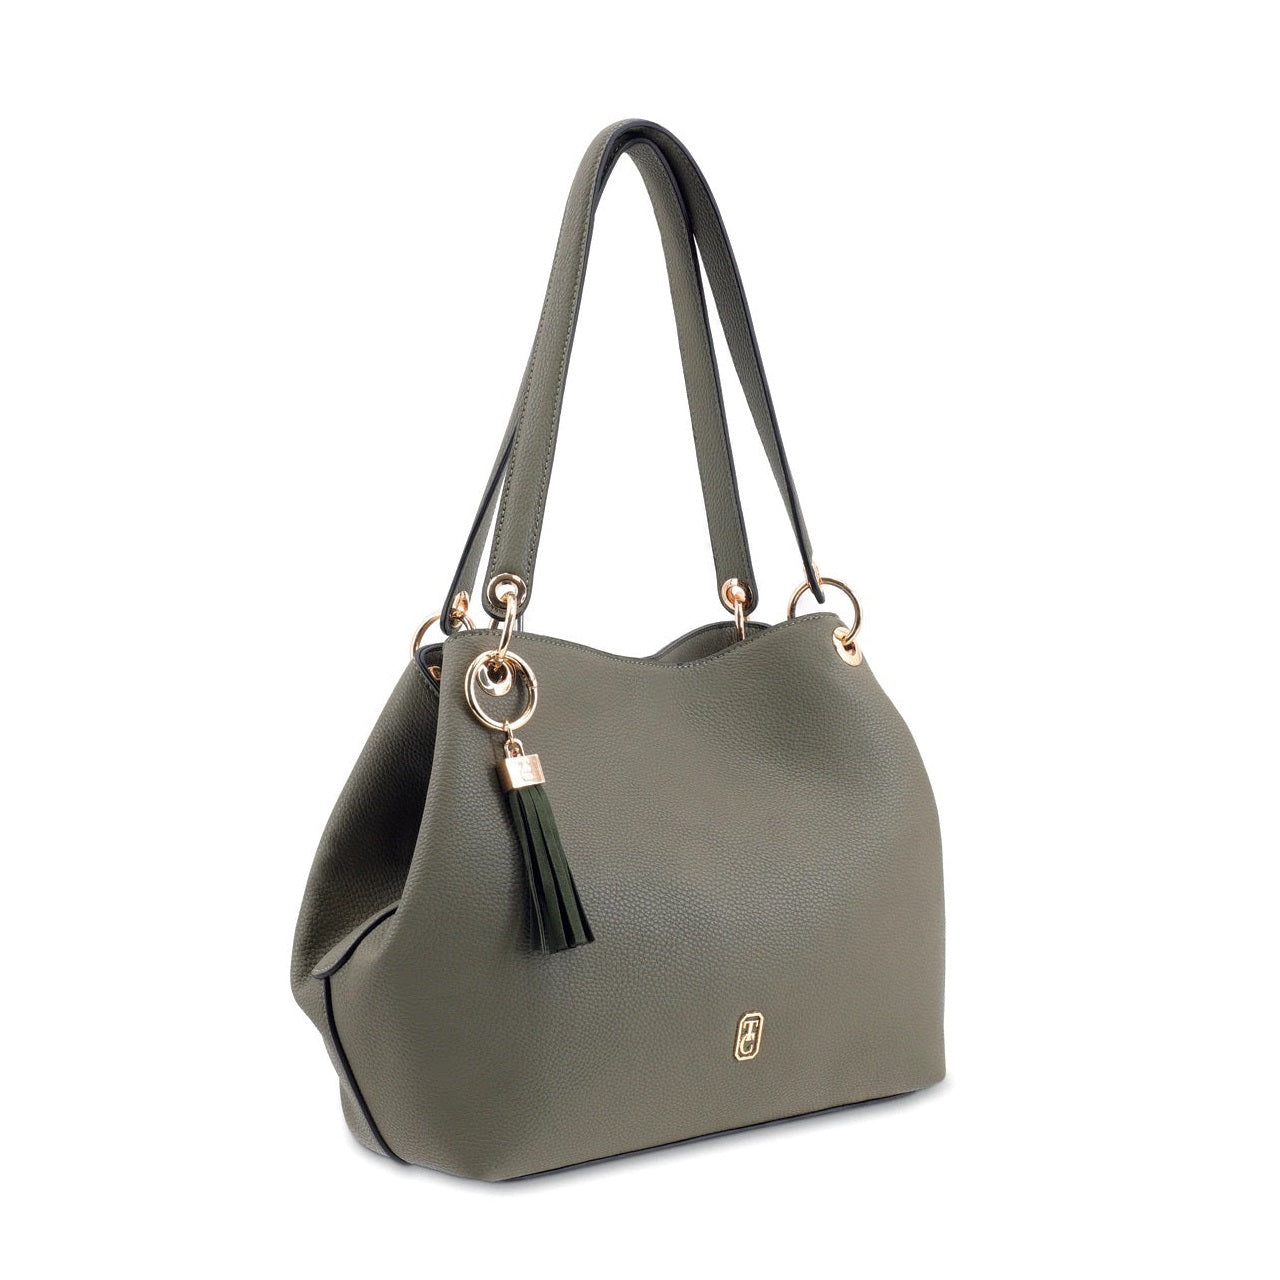 Tipperary Crystal Sicily Olive Tote Bag  Tote Bag - Sicily Olive (Yellow gold hardware)  Our effortless Sicily Shoulder Bag is so comfortable you’ll want to carry it everywhere. This bag is crafted using soft pebbled leather look PU, the contrast of this with the metal hardware makes for a very attractive and practical bag.